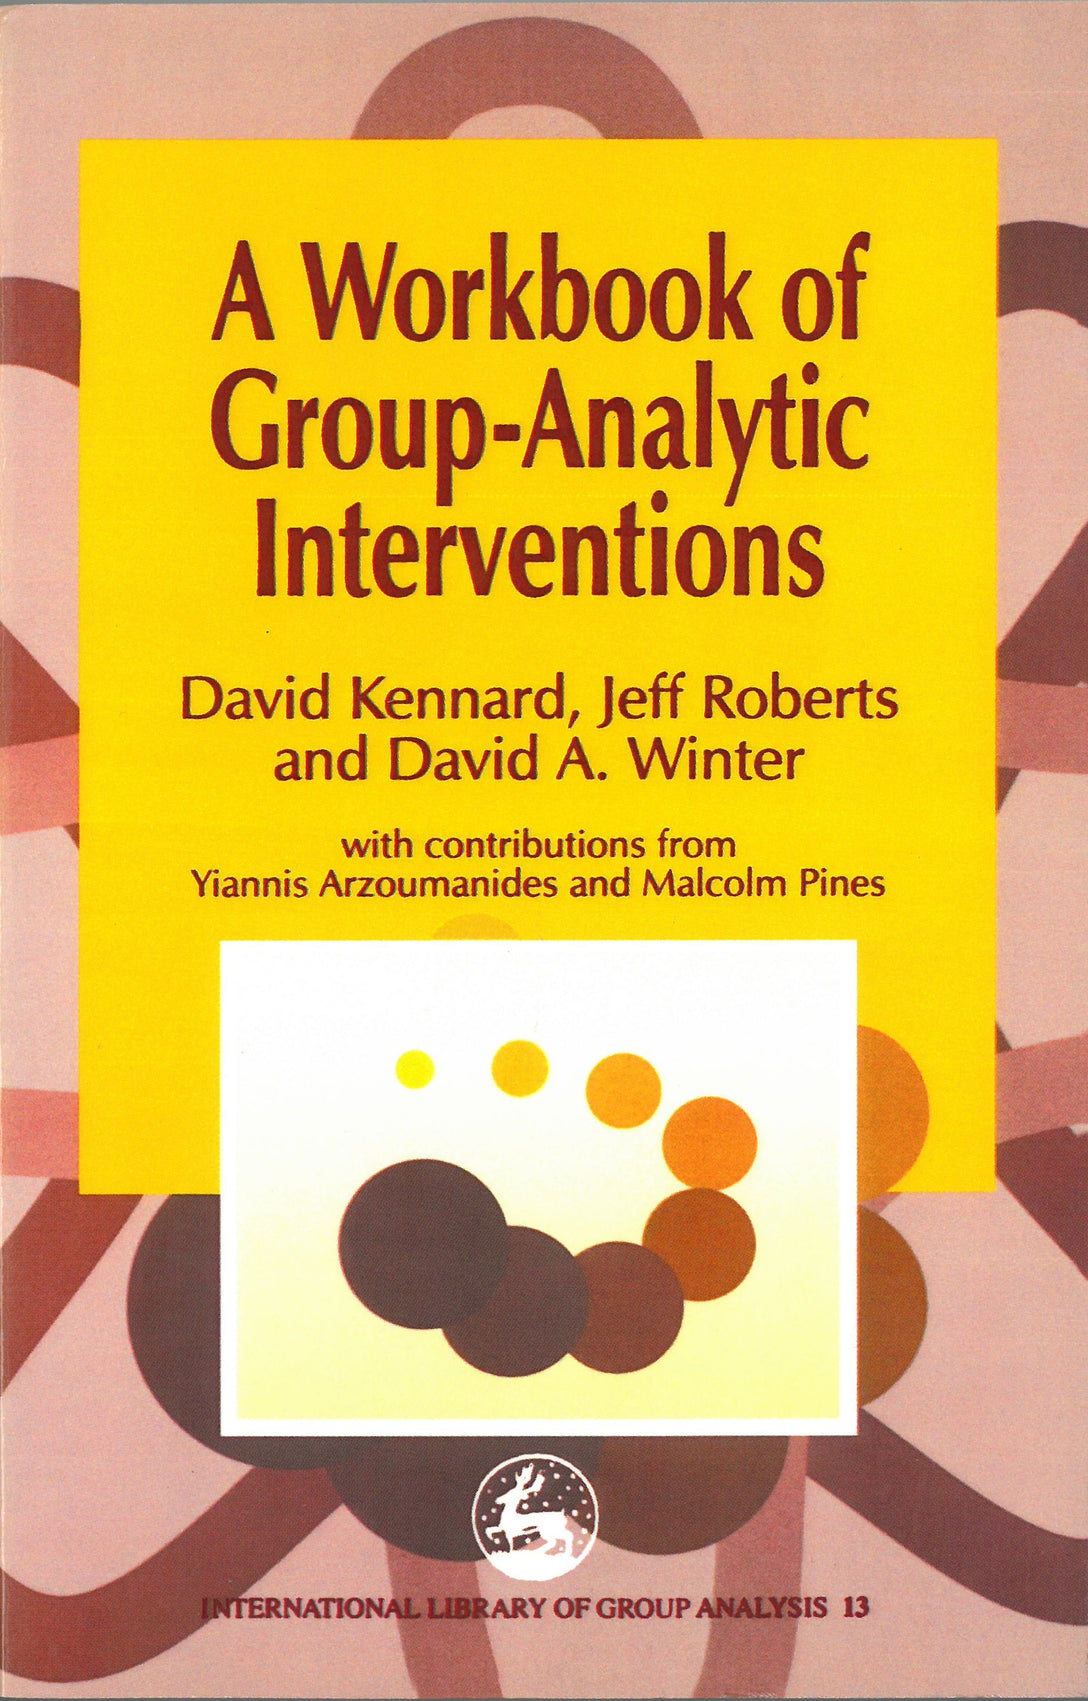 A Workbook of Group-Analytic Interventions by David A. Winter, Jeff Roberts, David Kennard